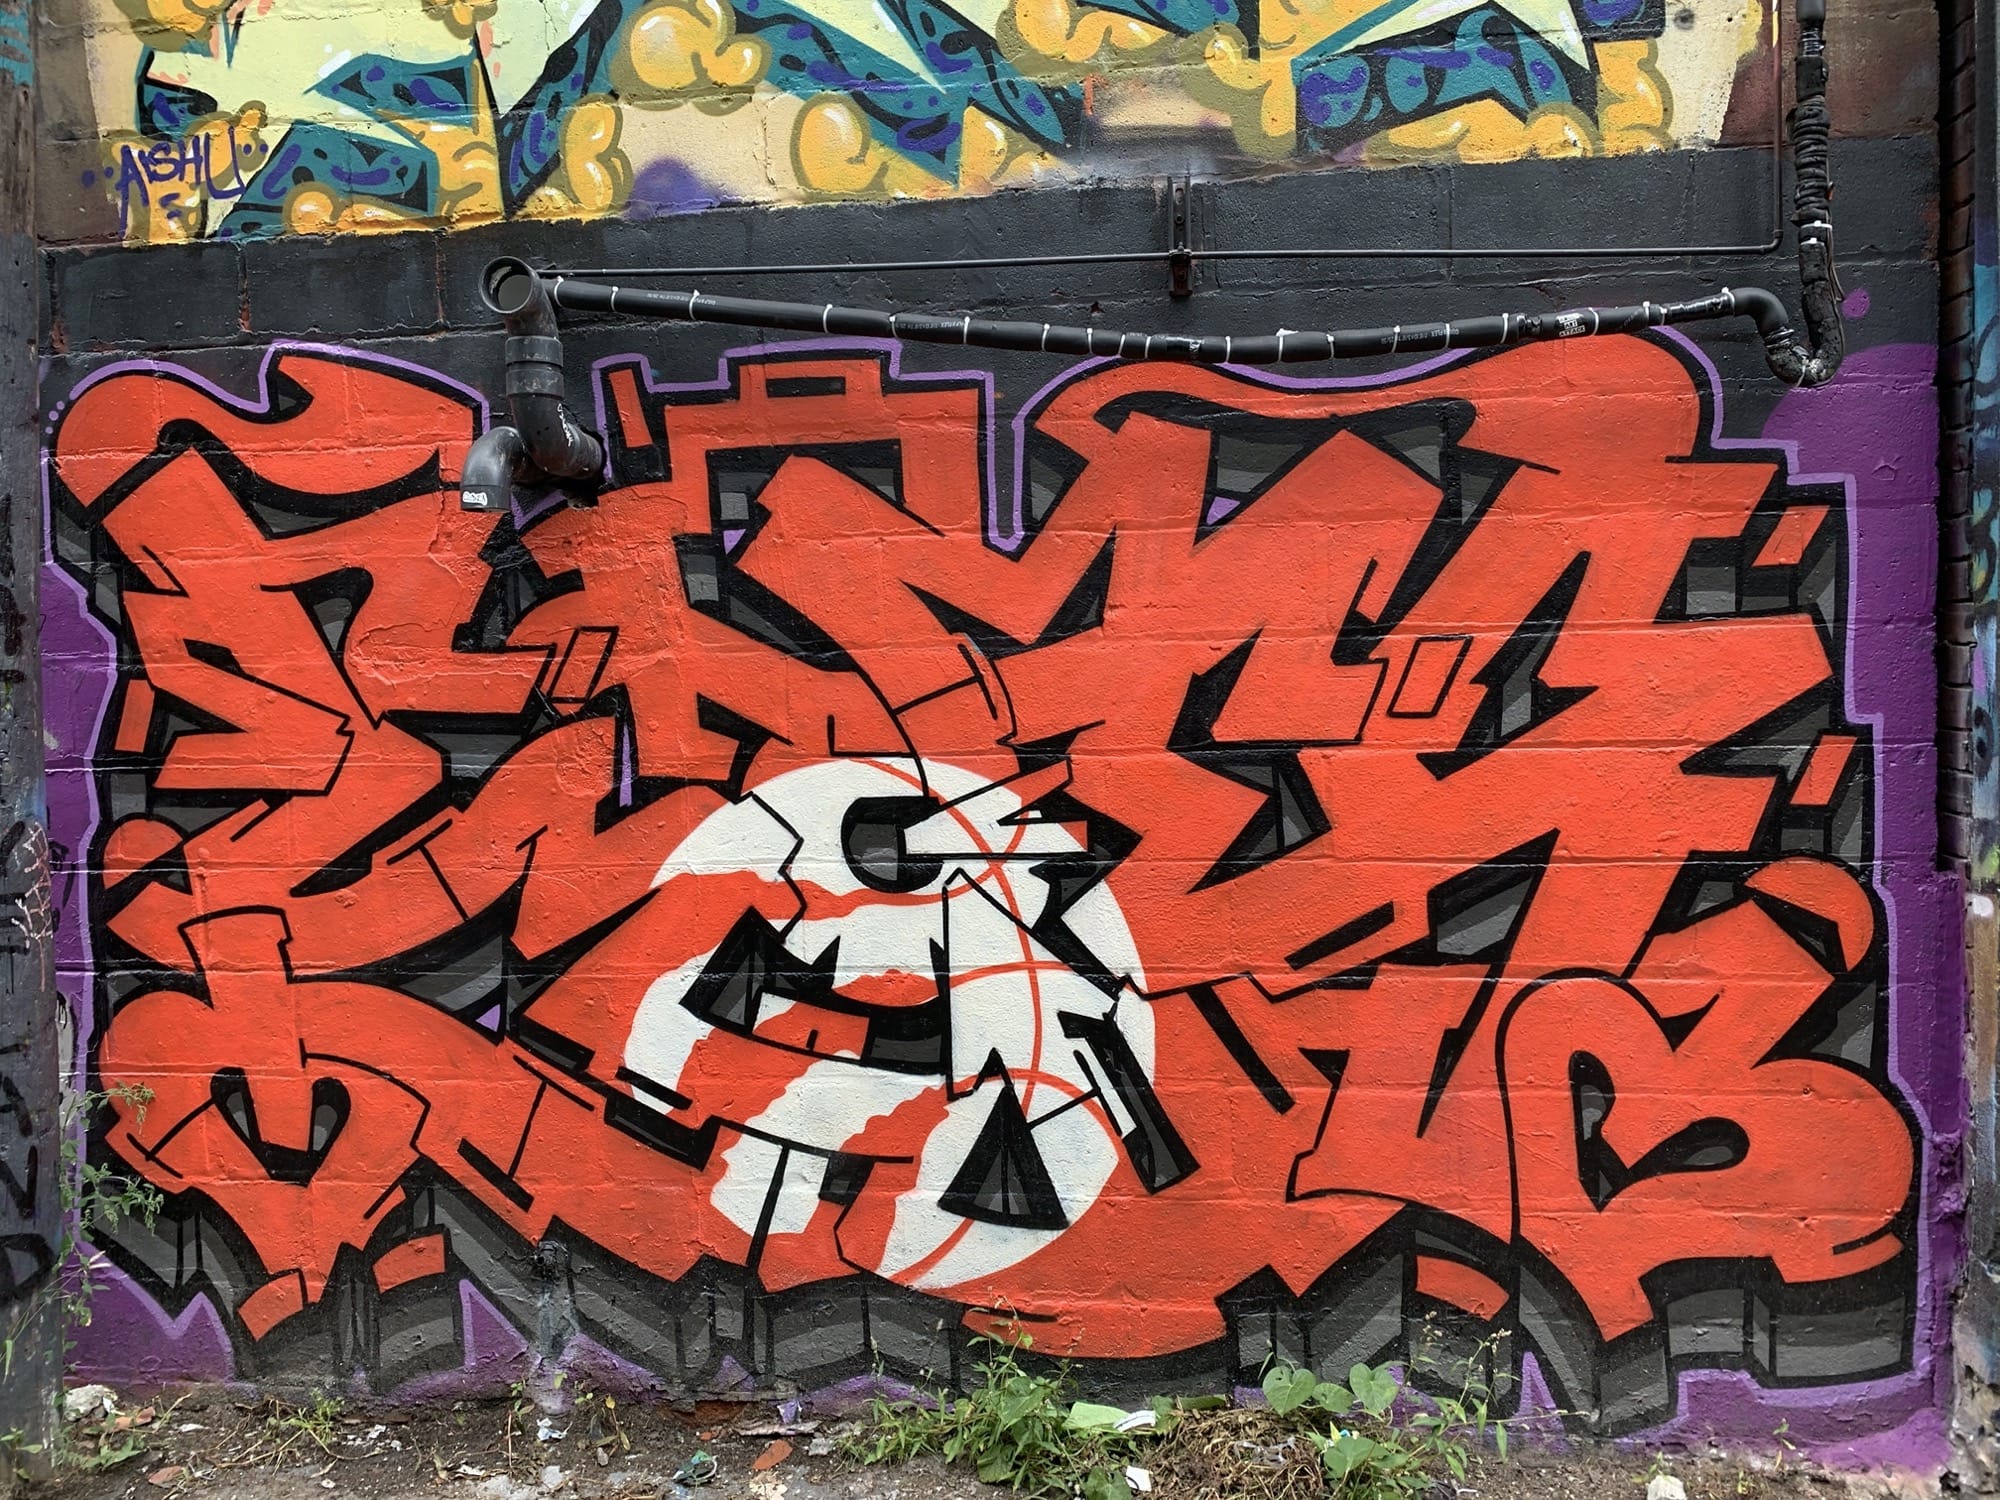 Graffiti 2545  captured by Rabot in Toronto Canada